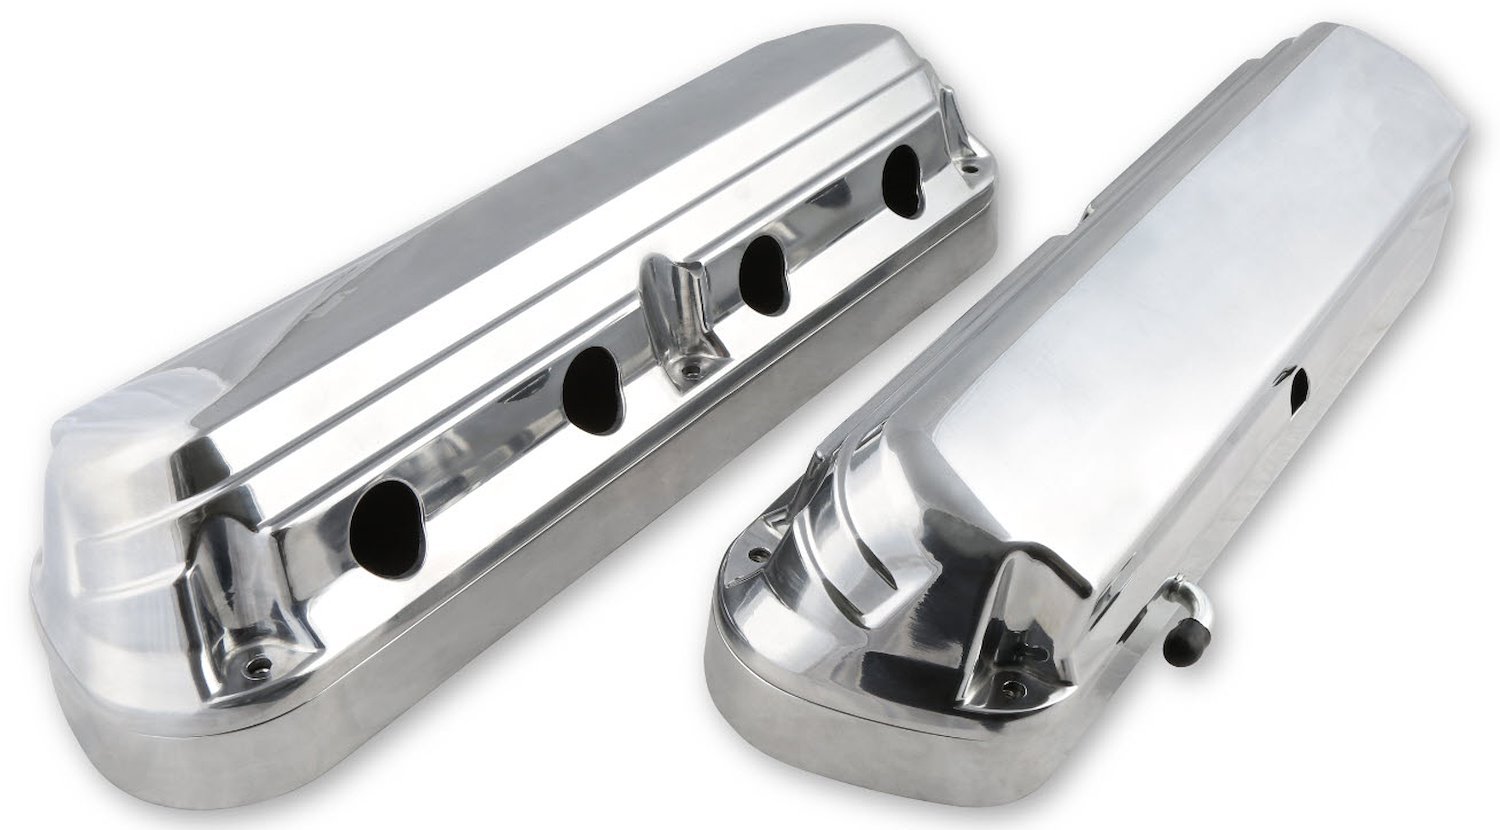 241-186 Ford Fox Body  Mustang-Style 2-Piece Cast-Aluminum Valve Covers for GM Gen III/IV LS Engines [Polished Finish]